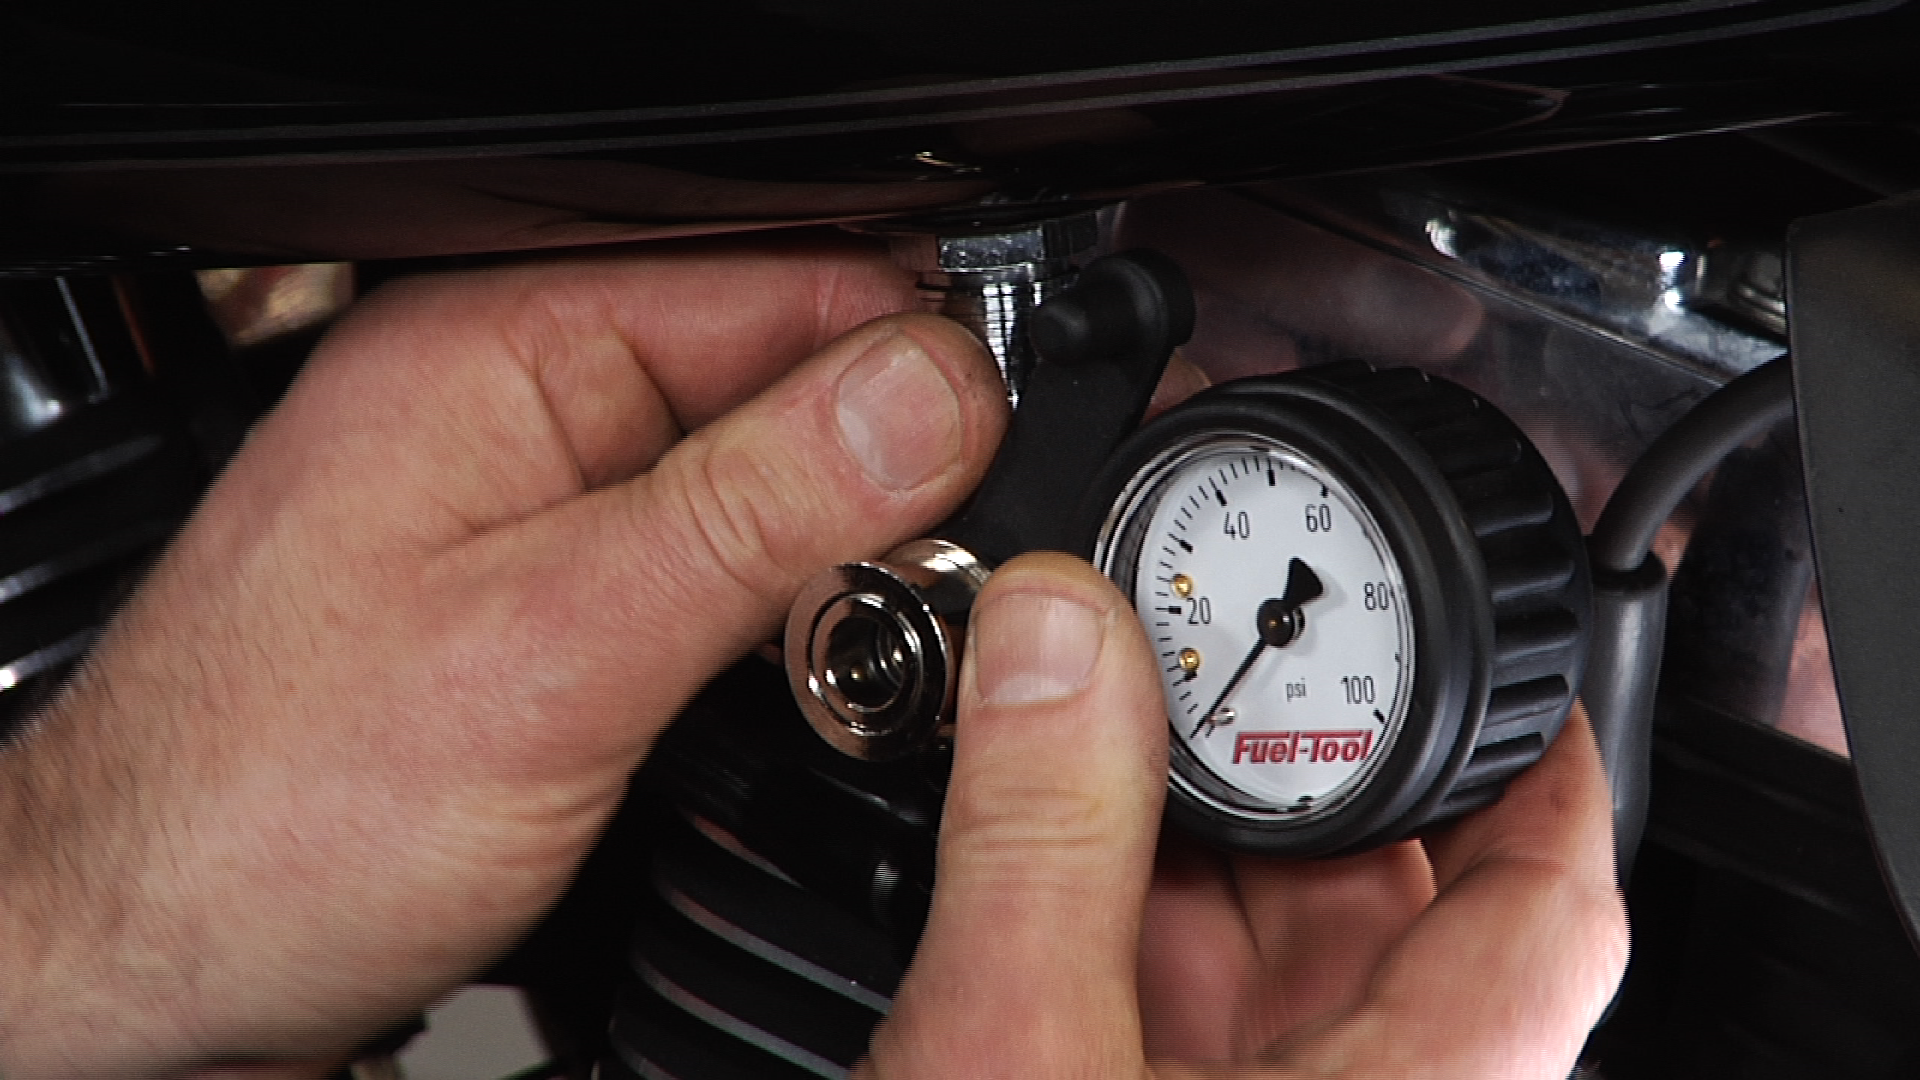 Using a Harley Fuel Pressure Tester product featured image thumbnail.